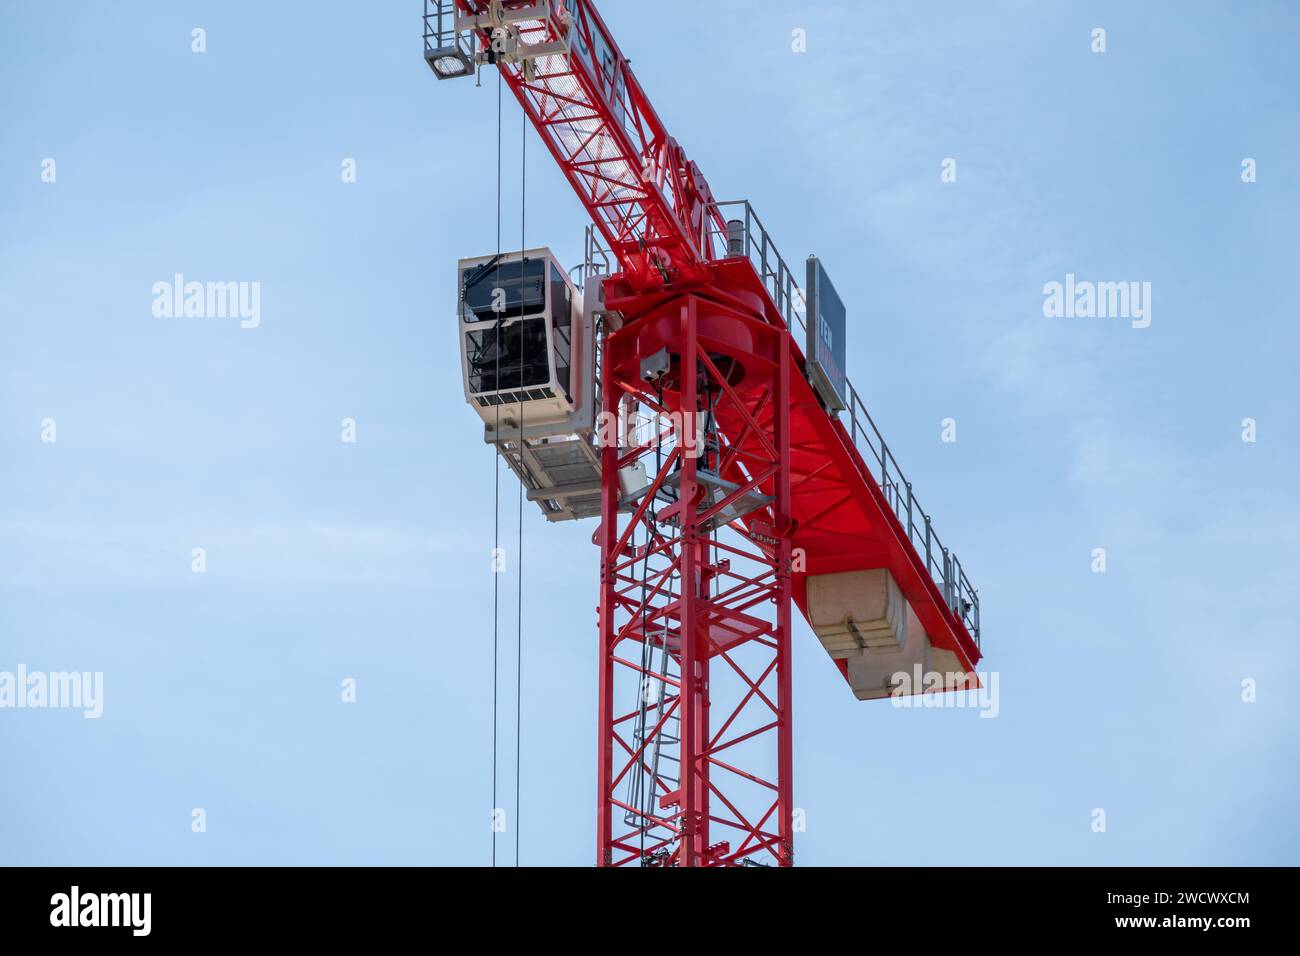 Detail of red tower crane with telescopic boom, stairs and cabin for workers, Netherlands Stock Photo